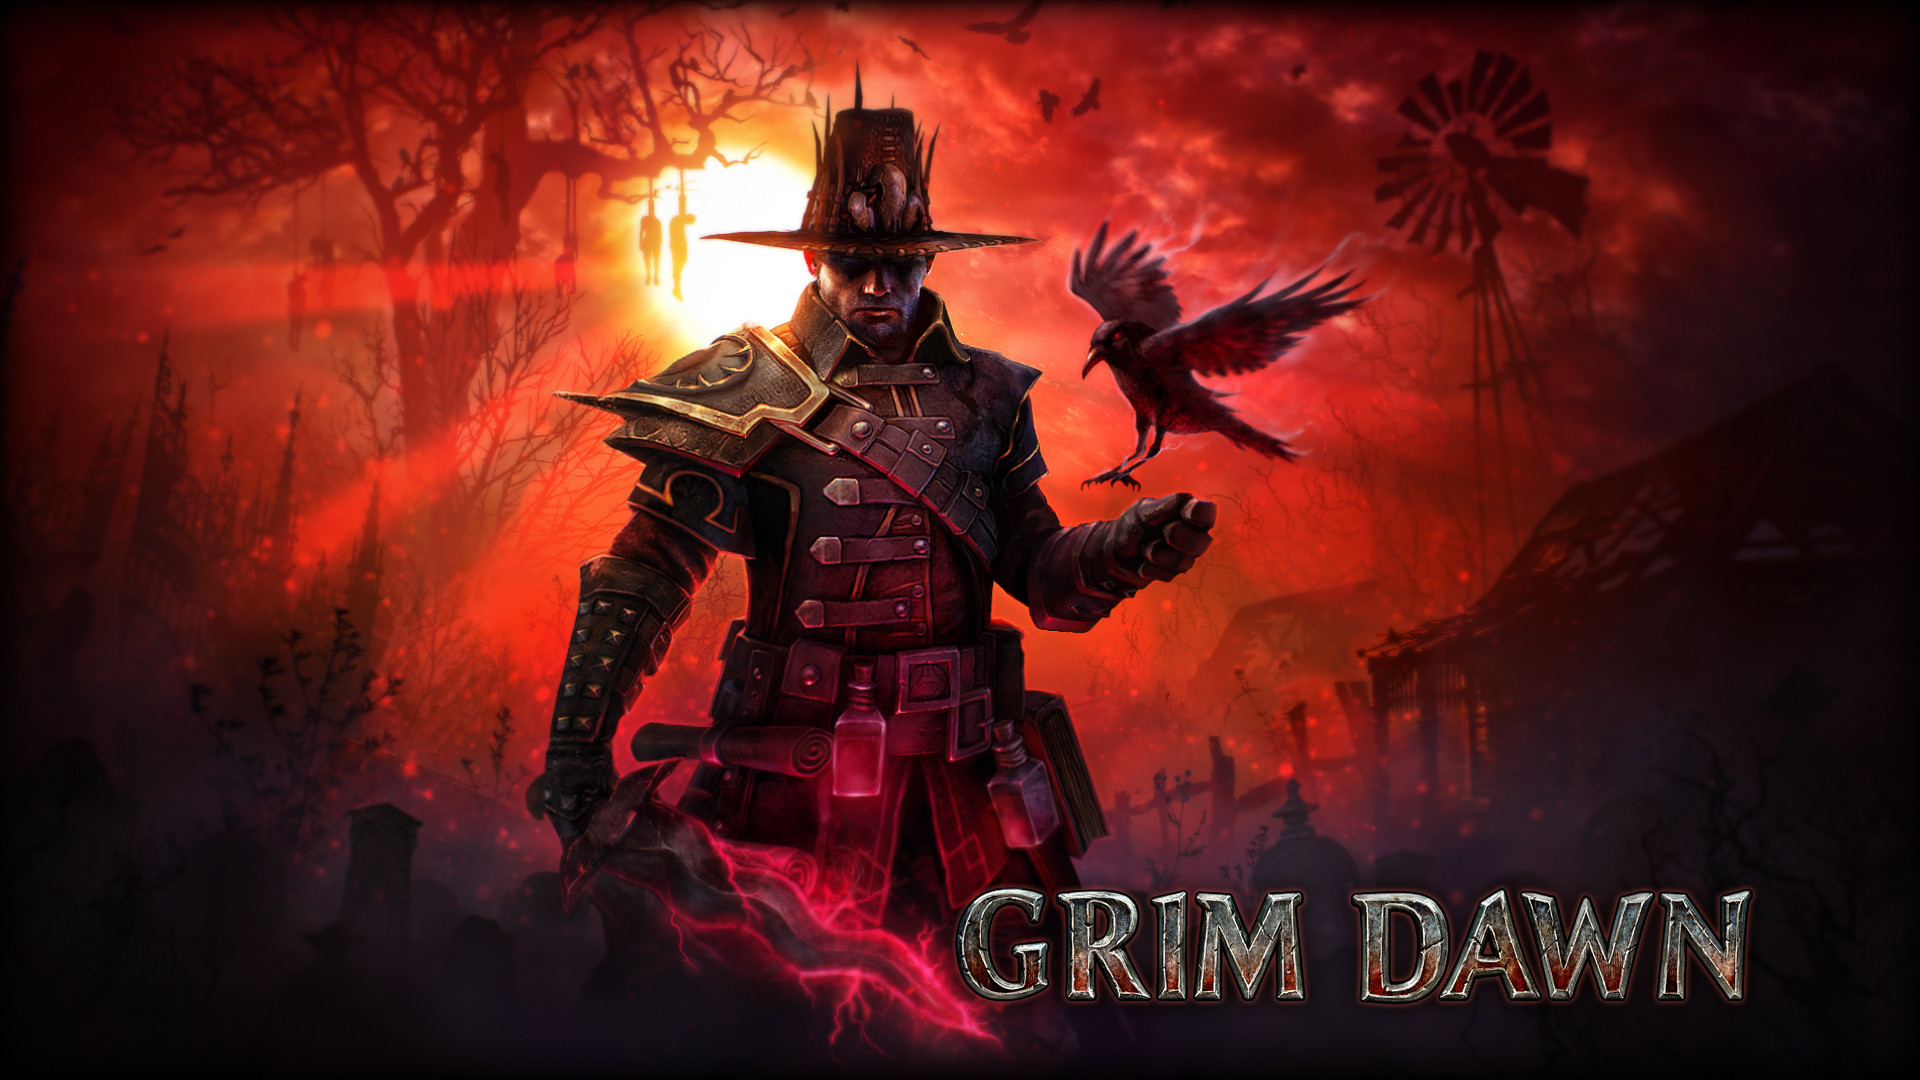 Grim dawn collect aetherial essence